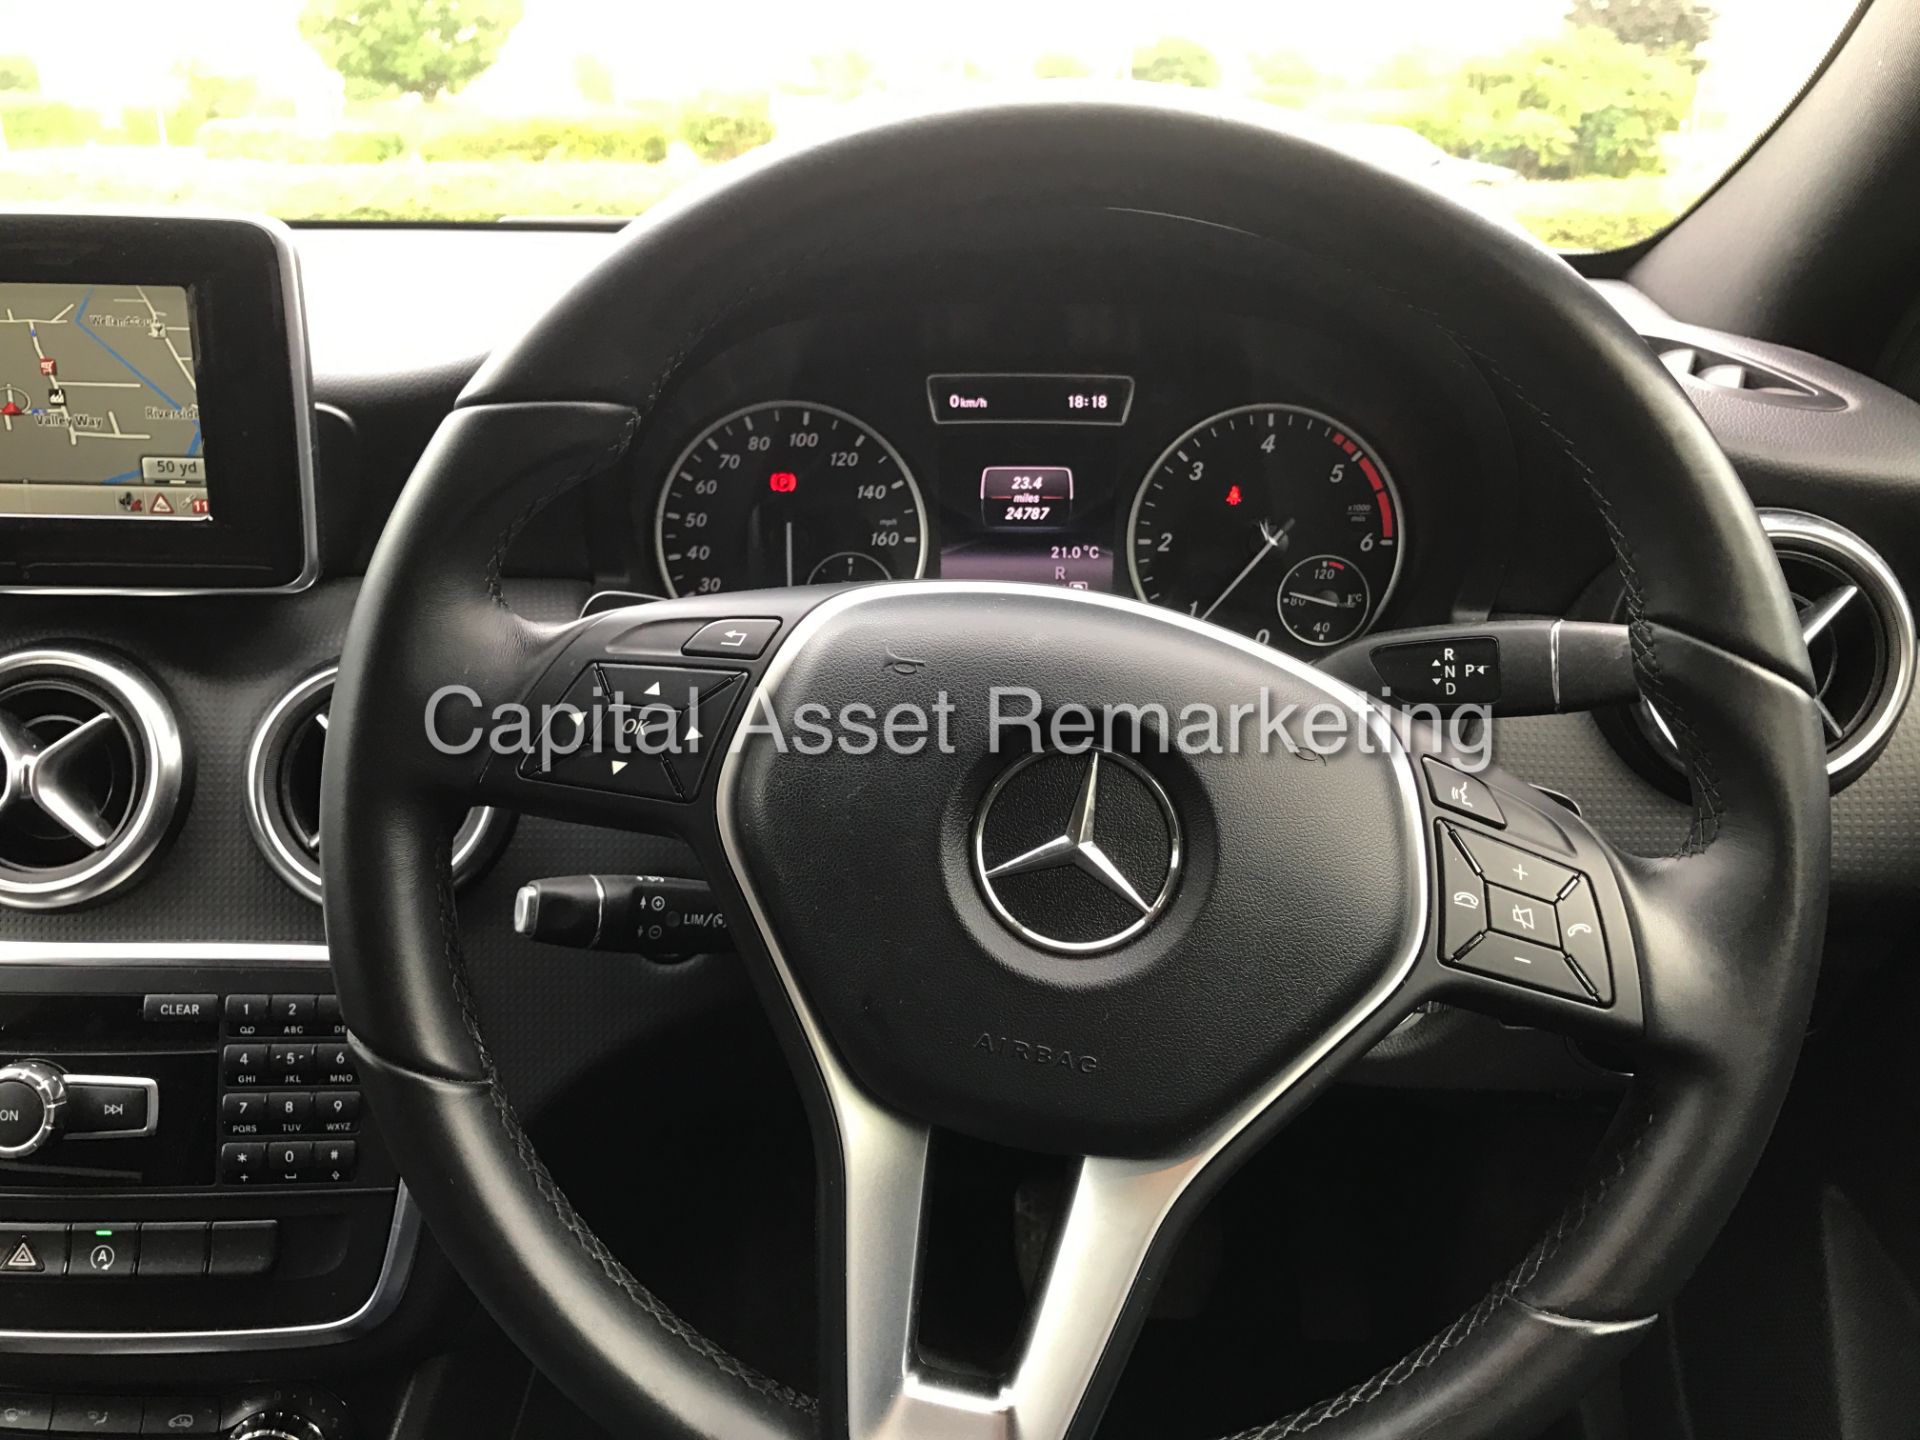 (ON SALE) MERCEDES A180d 7G TRONIC "15 REG" SAT NAV - 1 OWNER - PADDEL SHIFT - CRUISE - AIR CON - Image 16 of 22